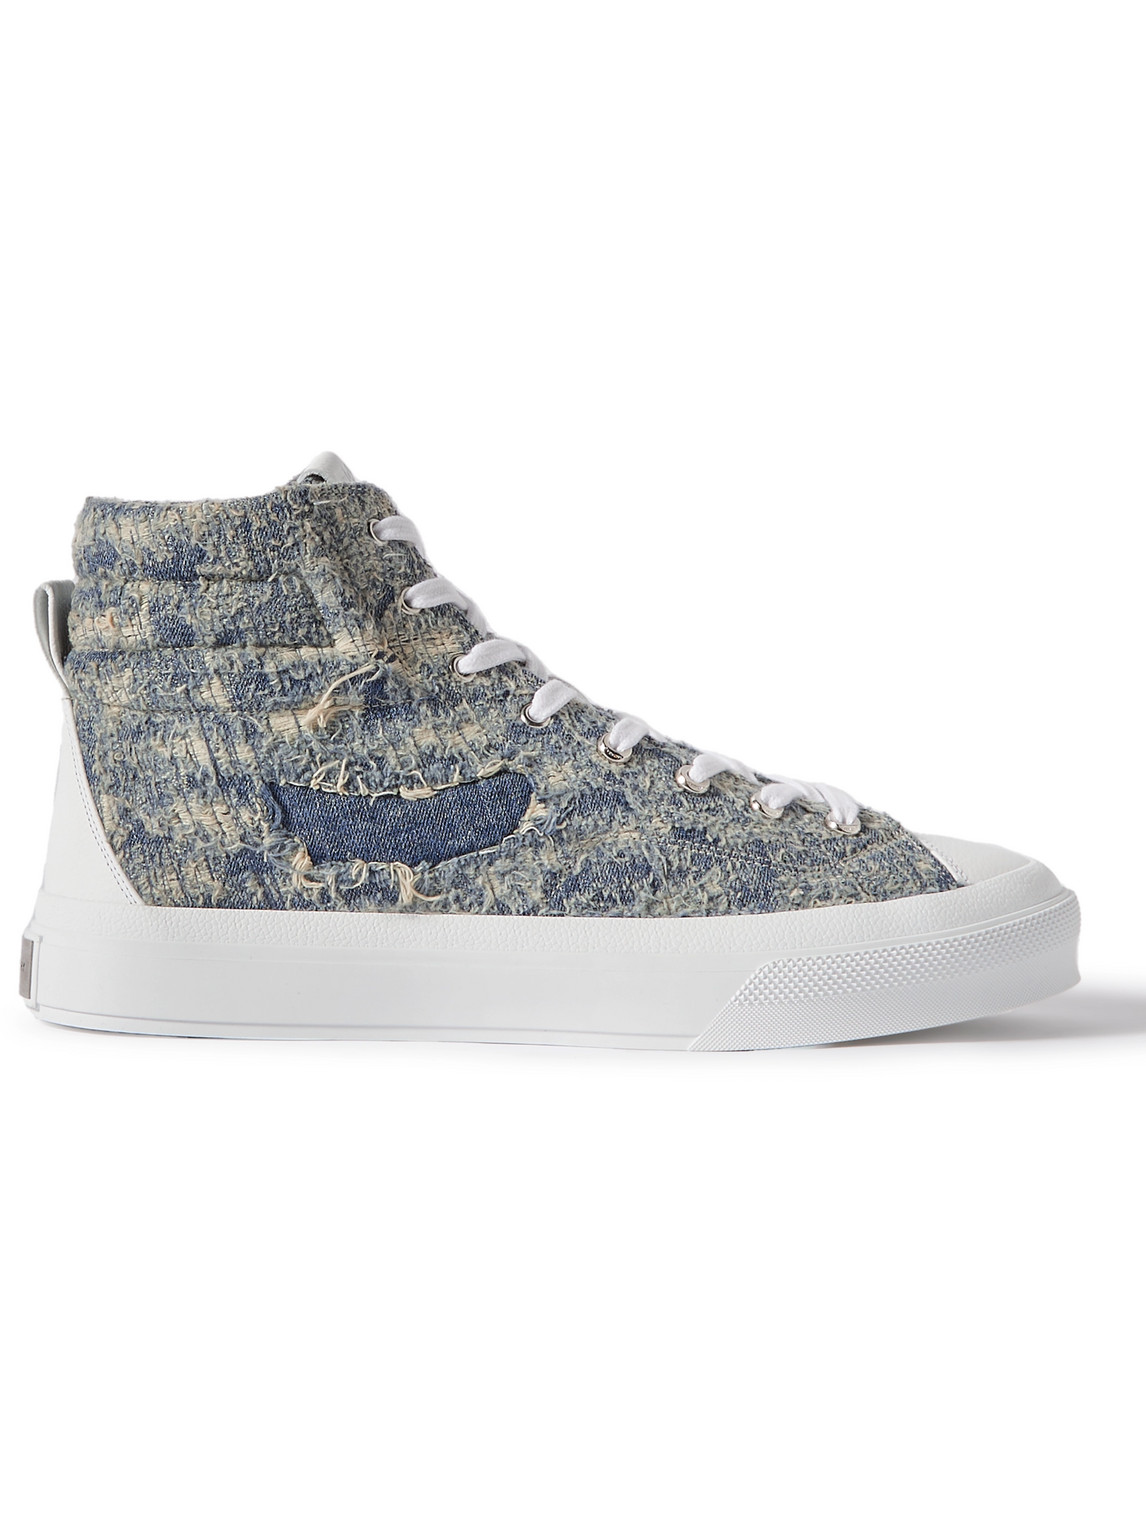 Givenchy City Leather-Trimmed Distressed Denim High-Top Sneakers